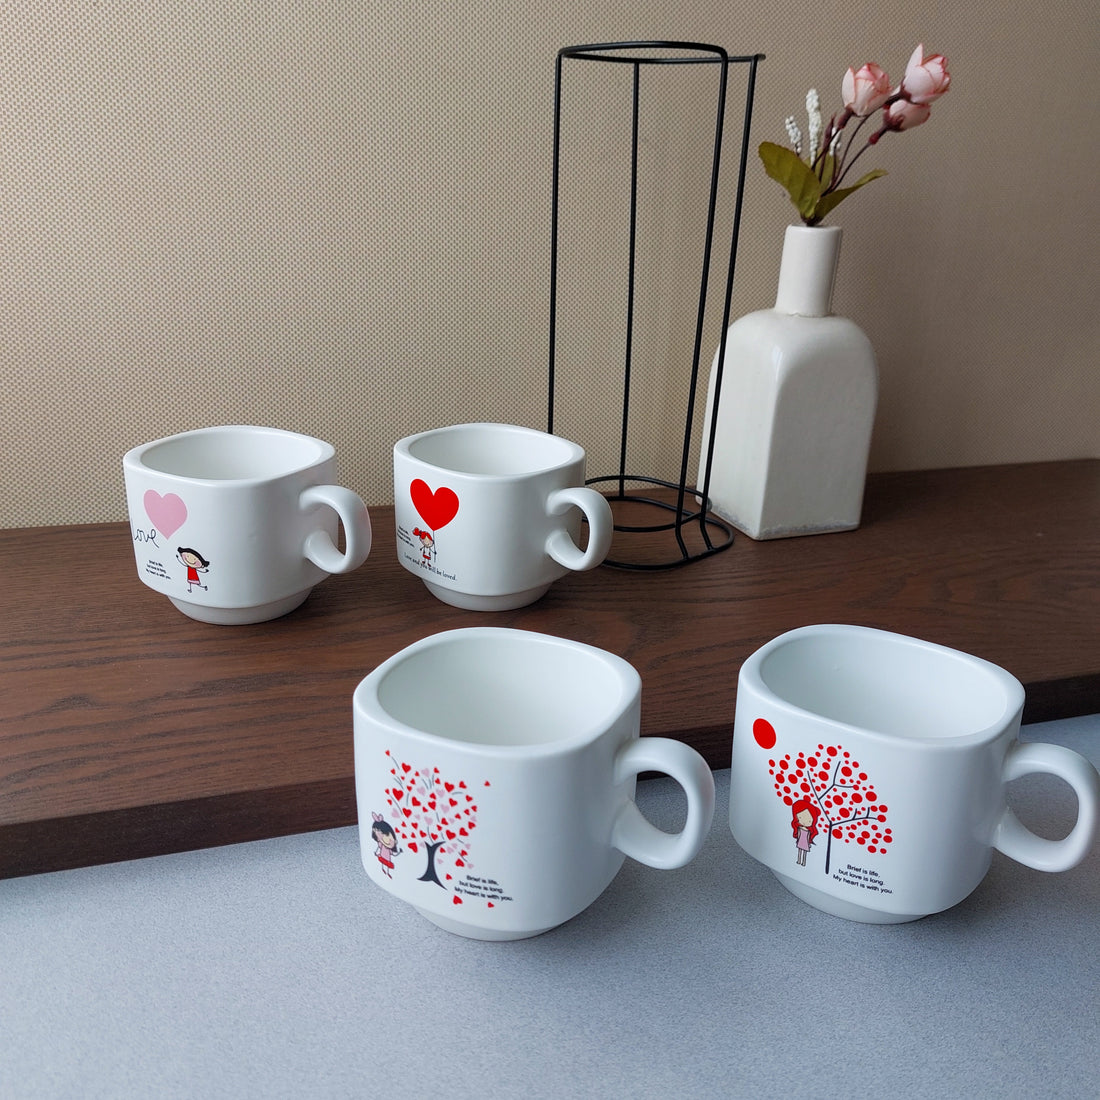 Love Messages Ceramic Mugs With Tower Stand (4 pcs set)